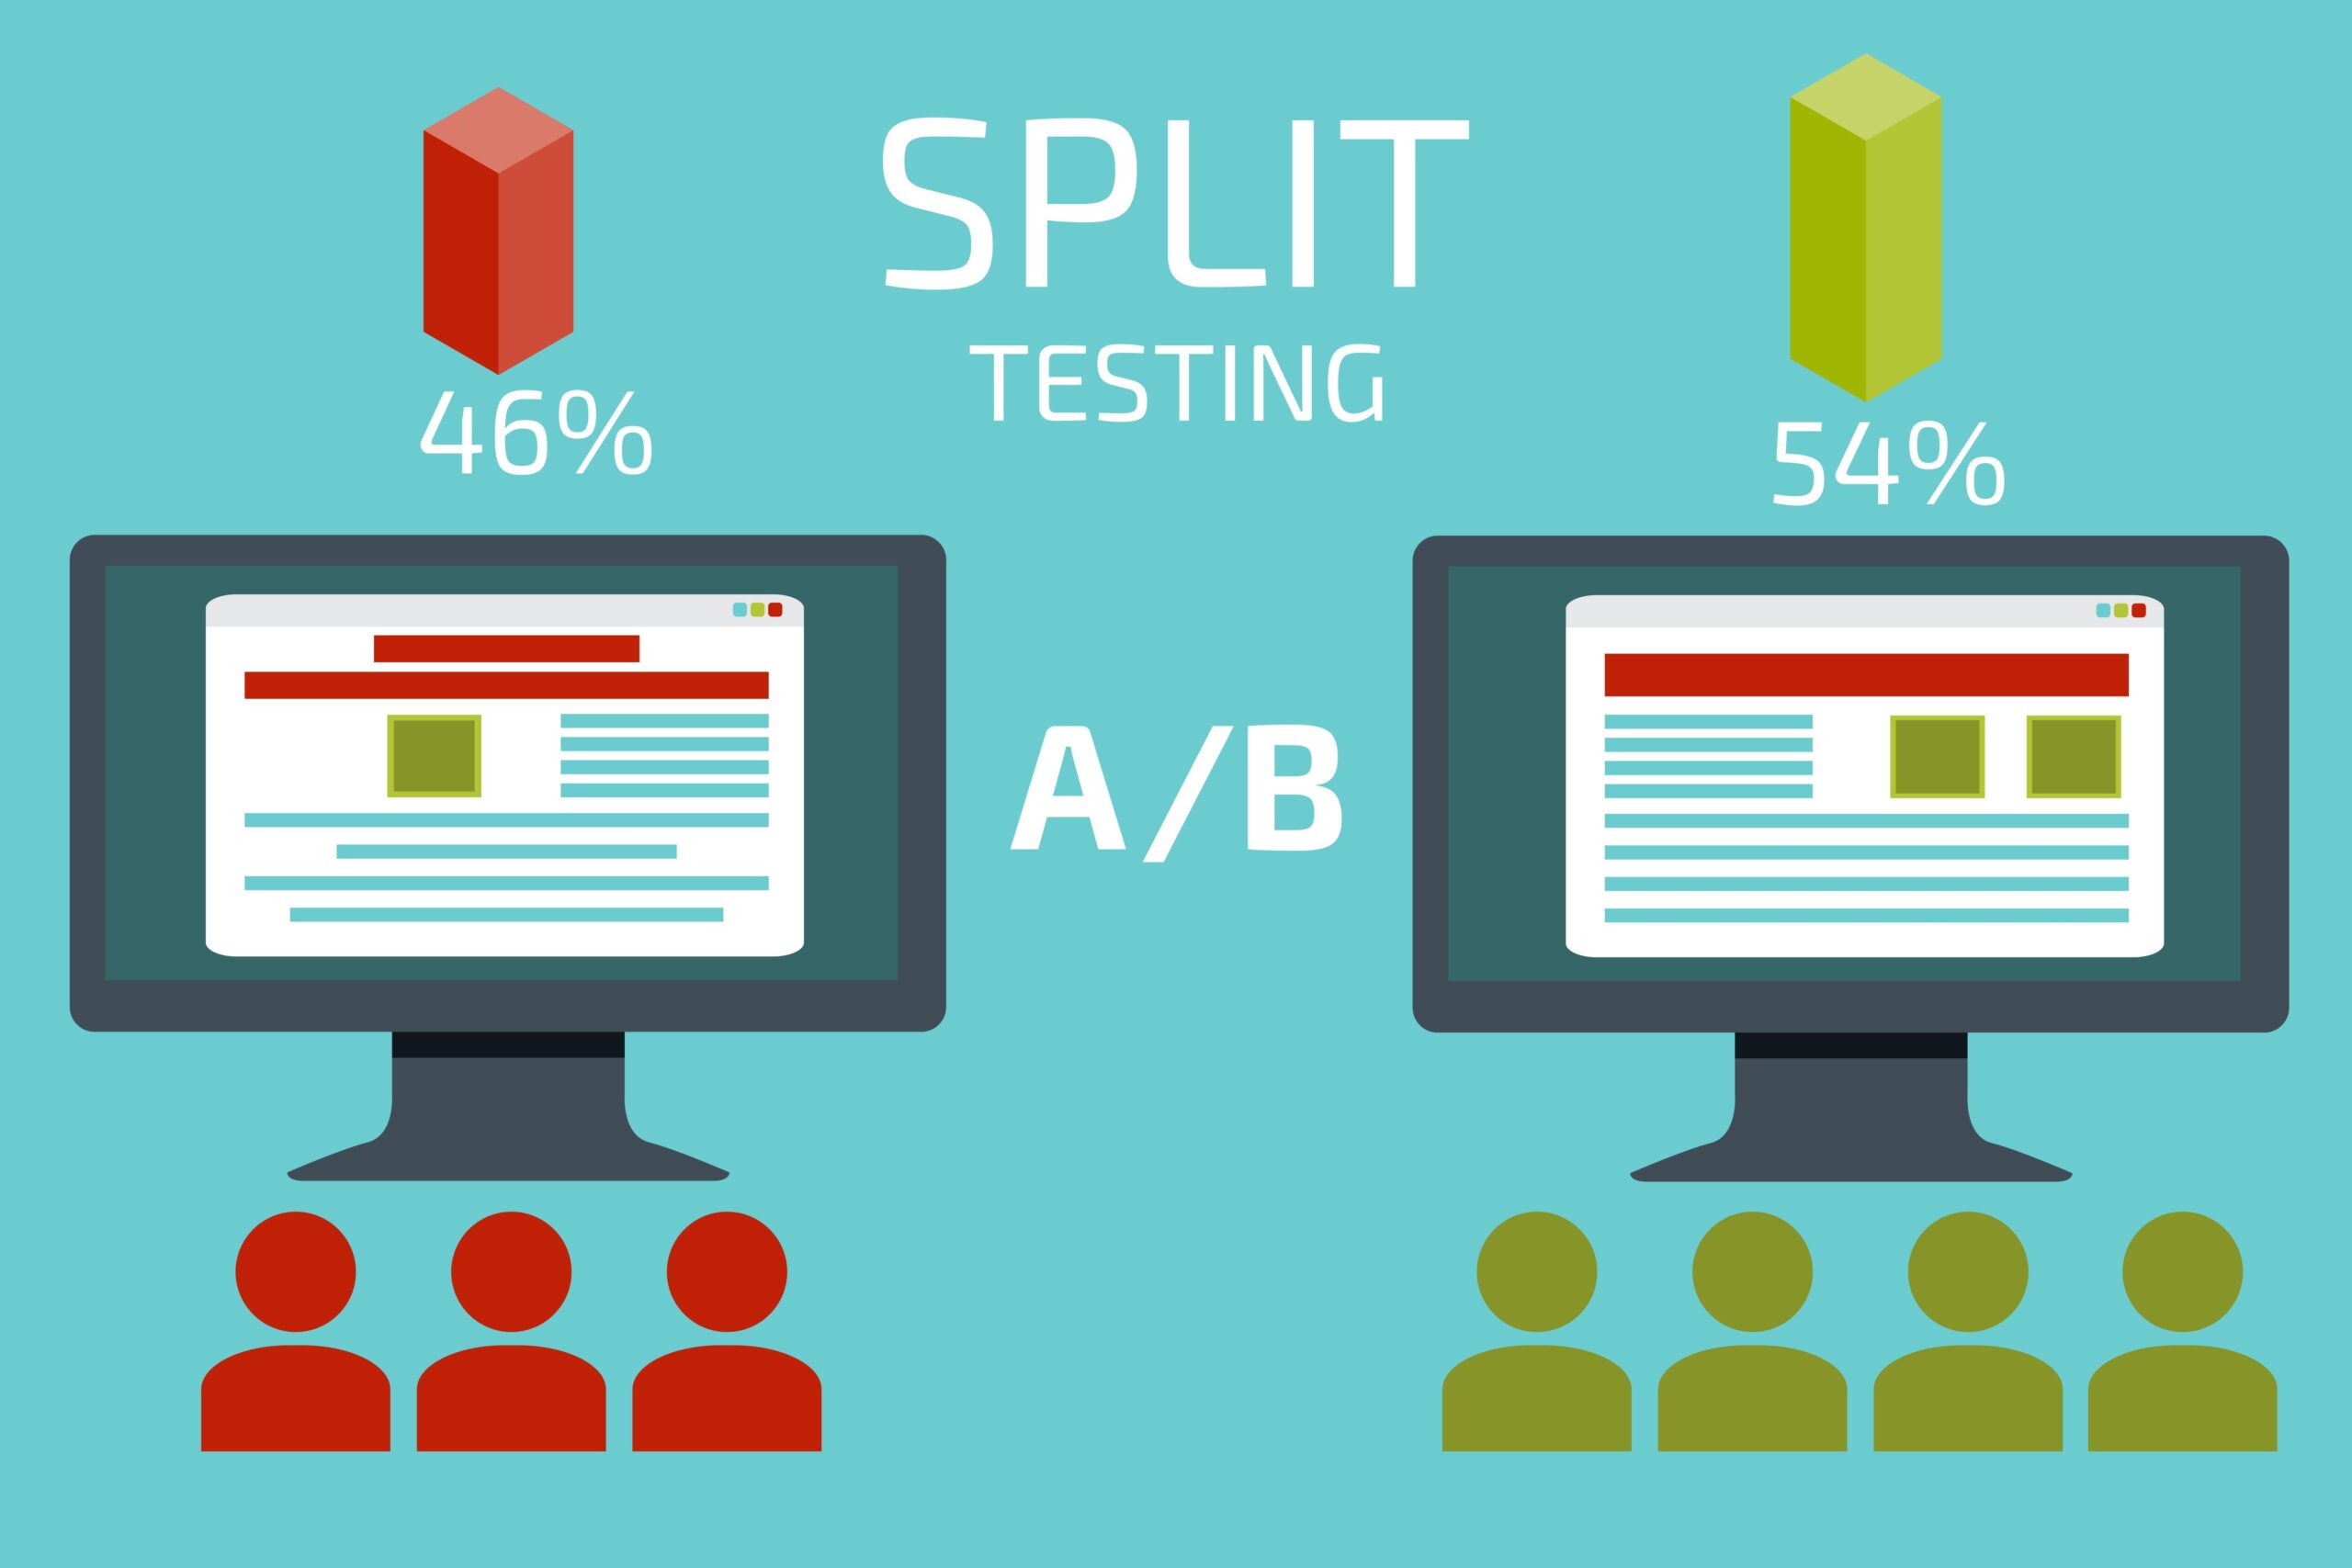 How To Conduct A/B Testing For Better Conversion Rates